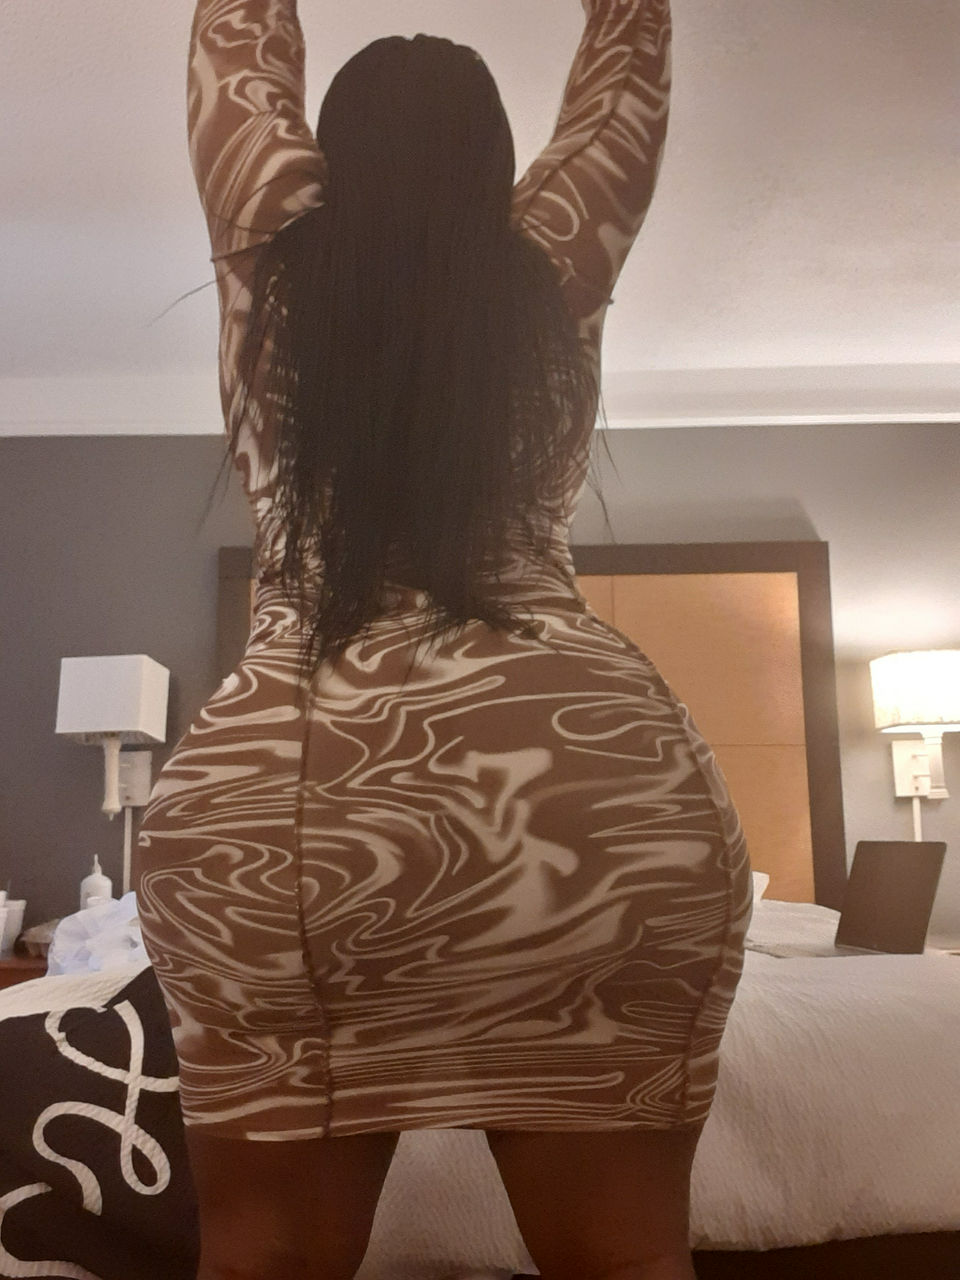 Escorts Fort Lauderdale, Florida ms bootieclappppp